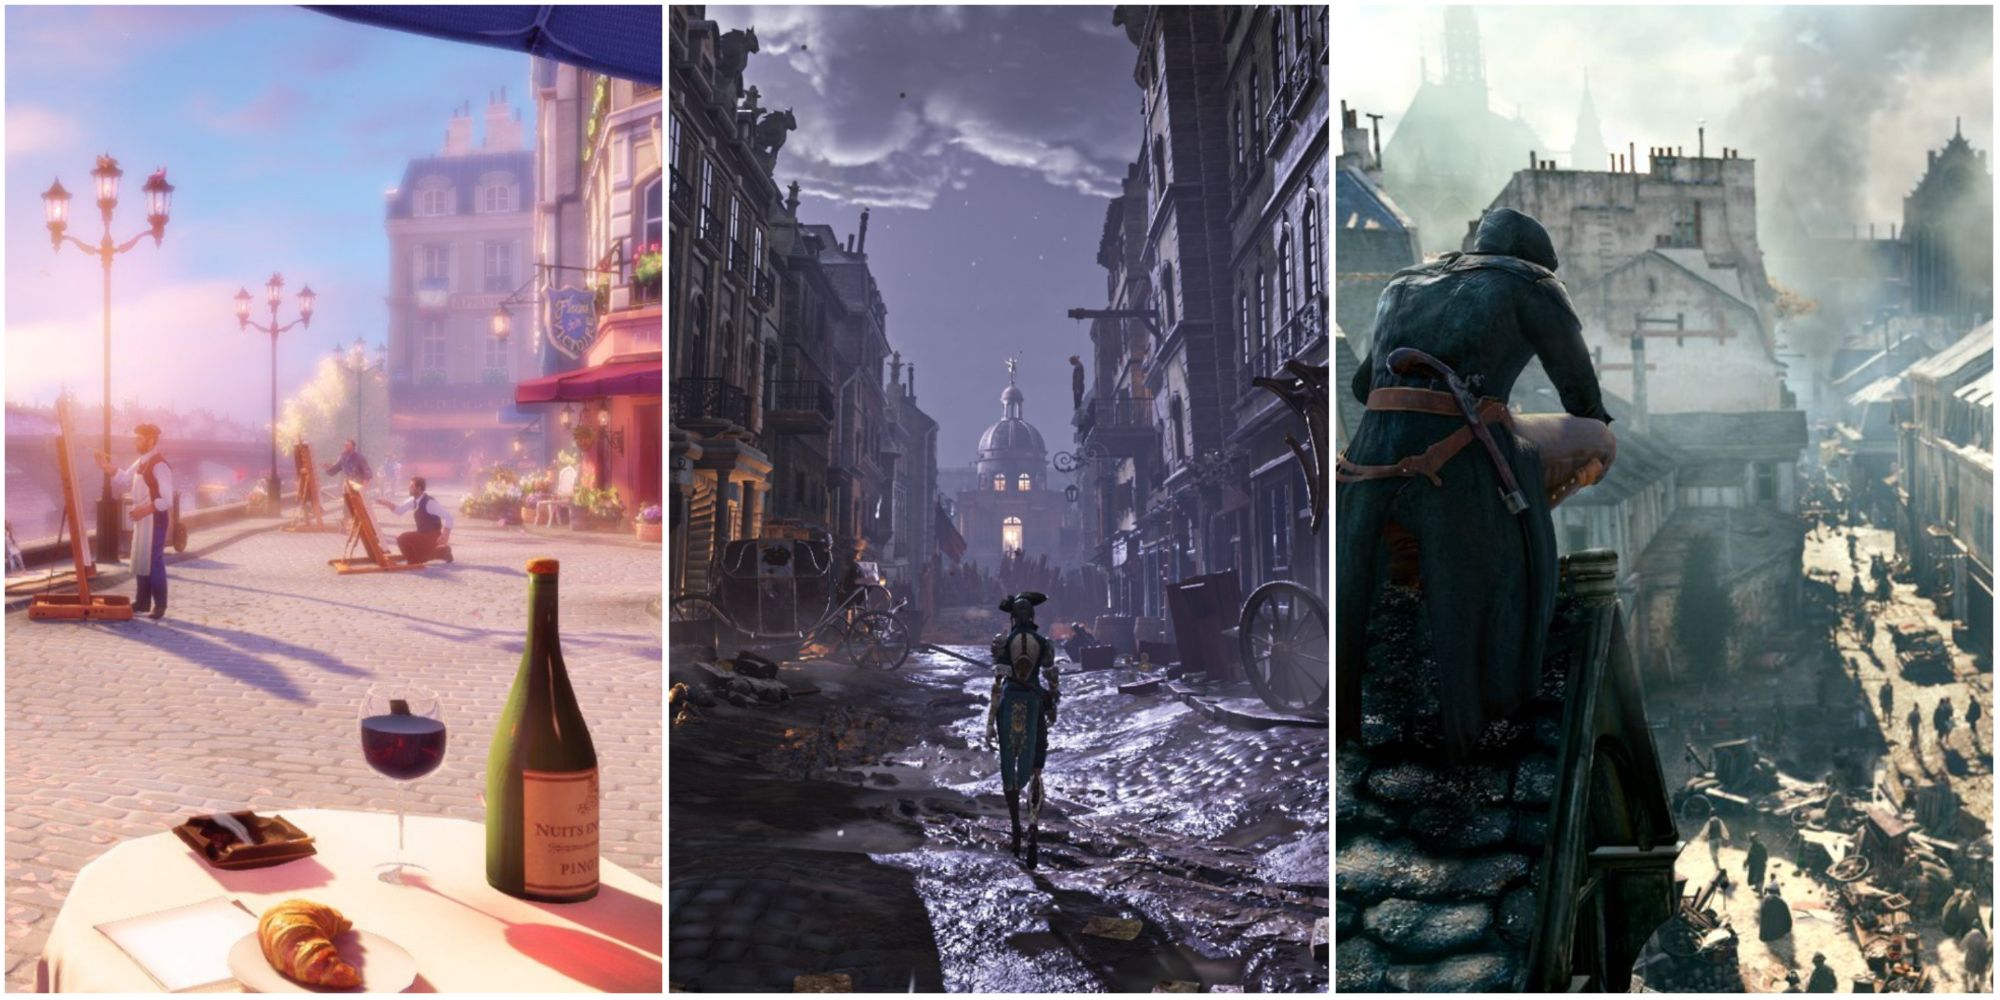 Collage of the Best Games Set In Paris, featuring Bioshock: Infinite, Steelrising, and Assassin's Creed: Unity